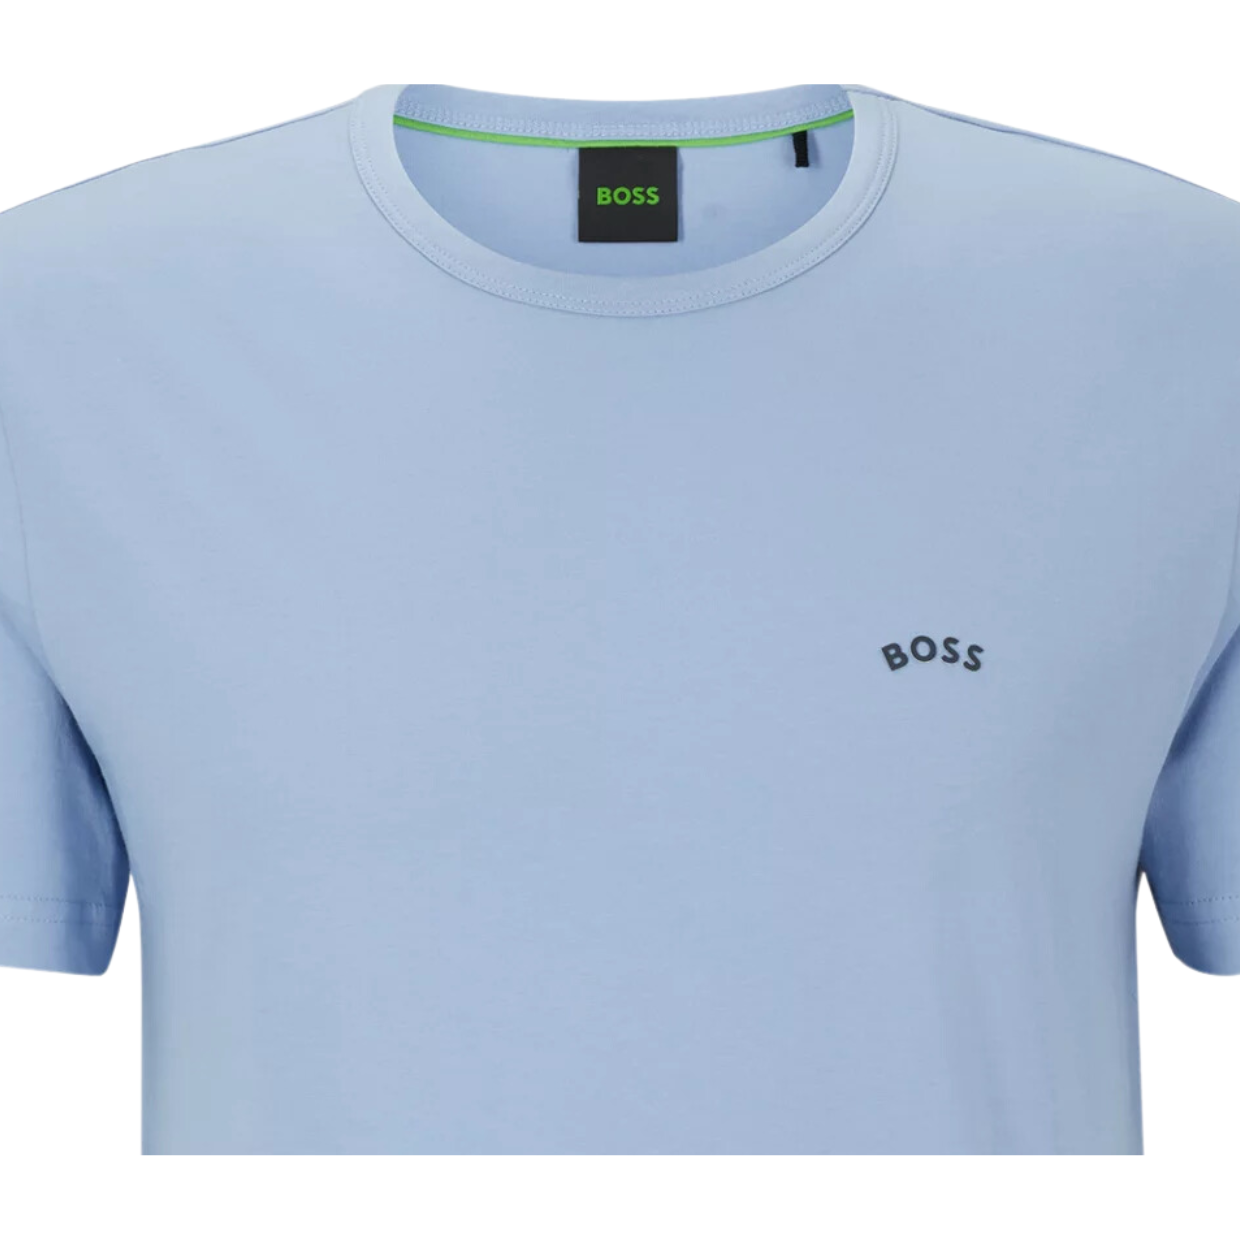 BOSS Blue Curved Tee